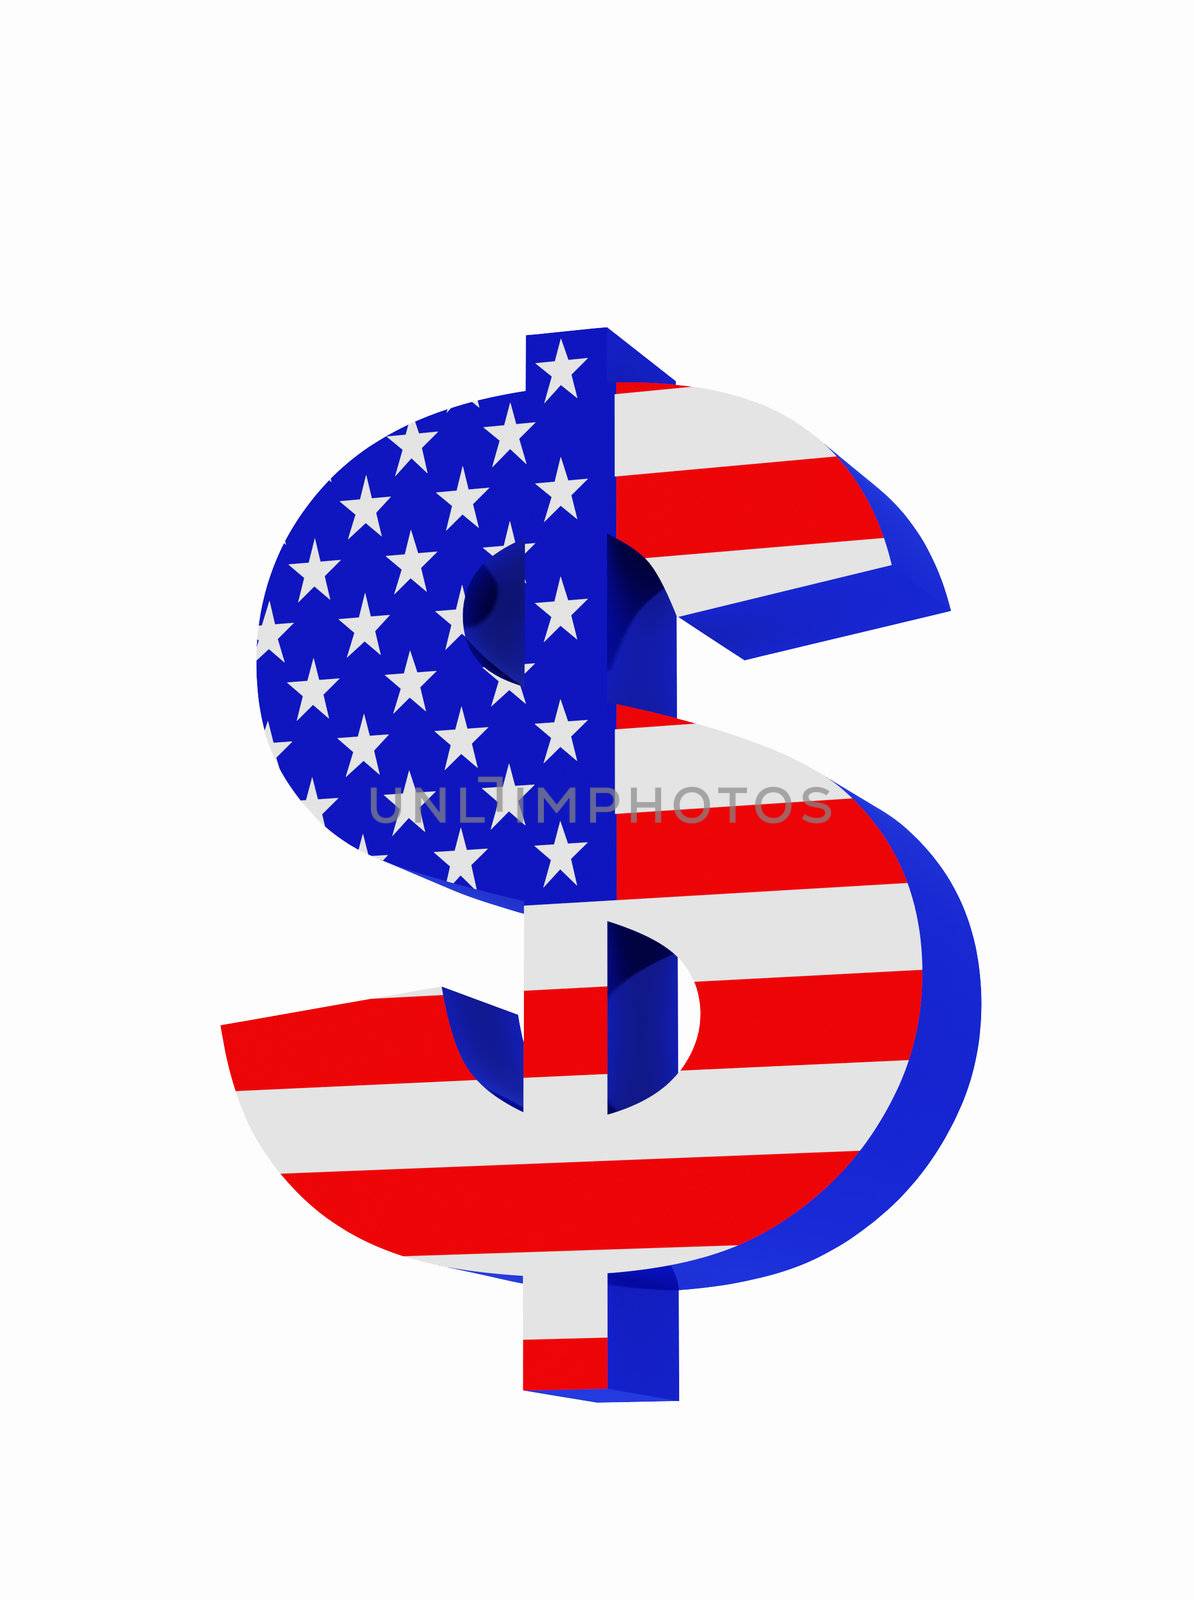 Dollar symbol isolated over a white background. High resolution image.